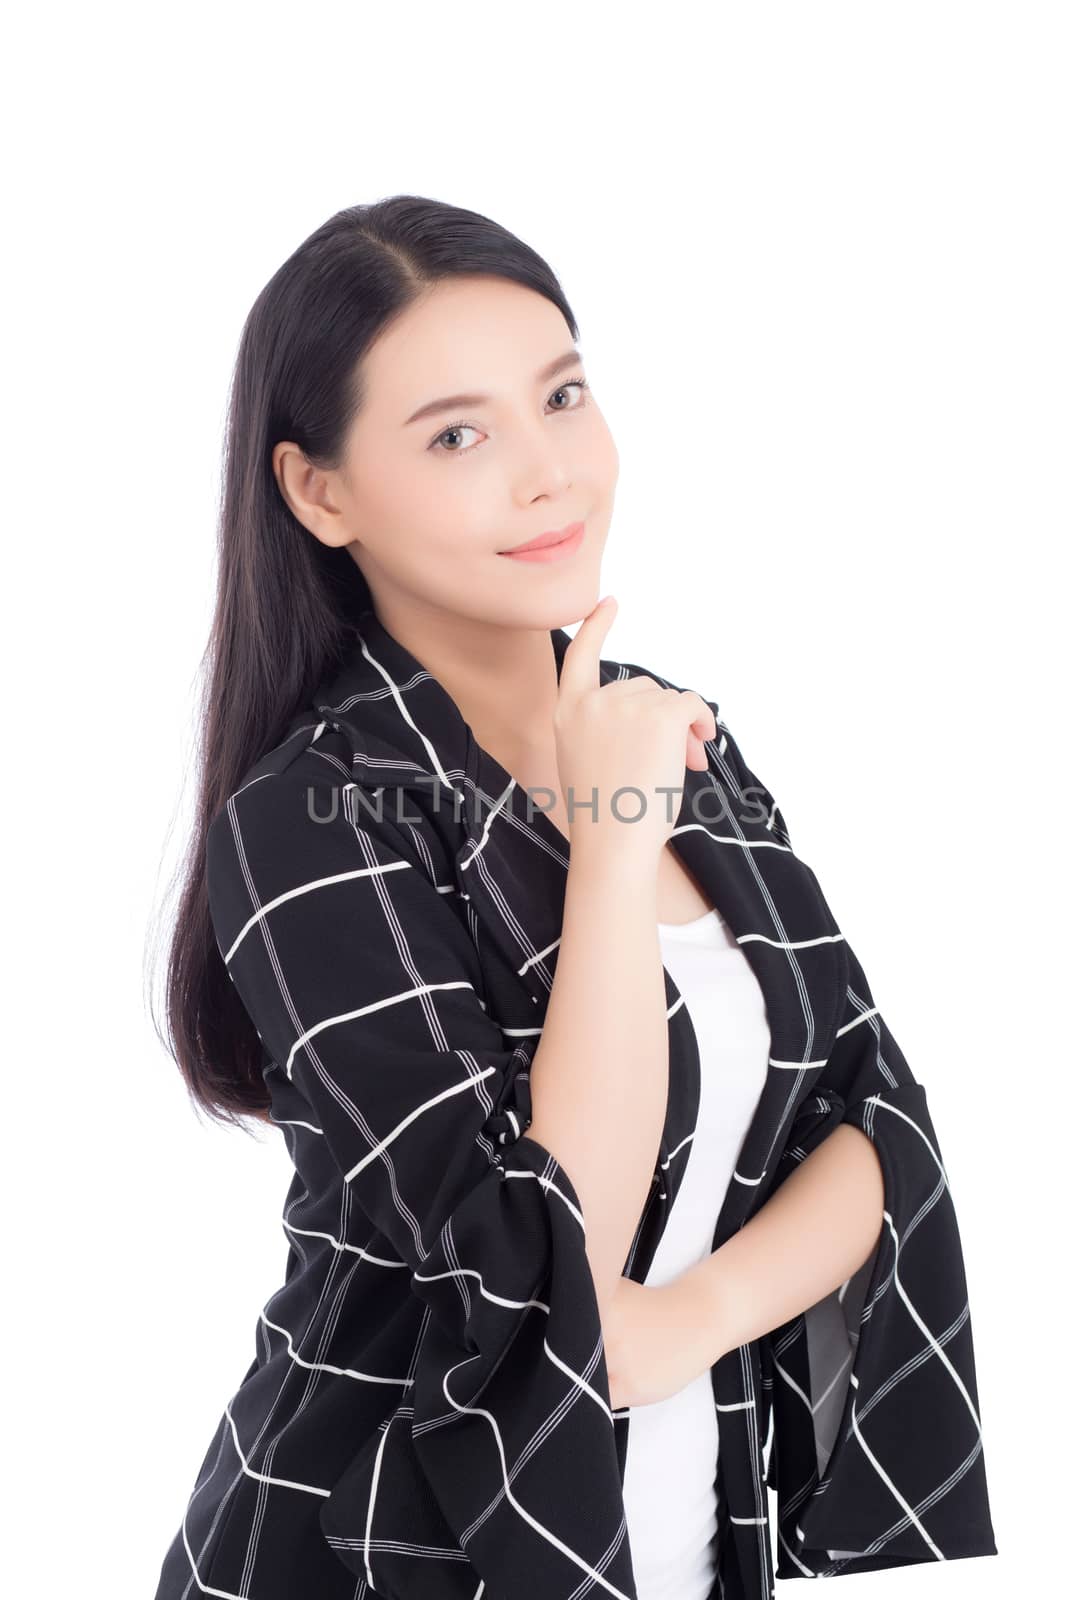 Portrait of beautiful woman asian makeup of cosmetic, girl hand touch chin and smile attractive, face of beauty perfect with wellness isolated on white background with skin healthcare concept.